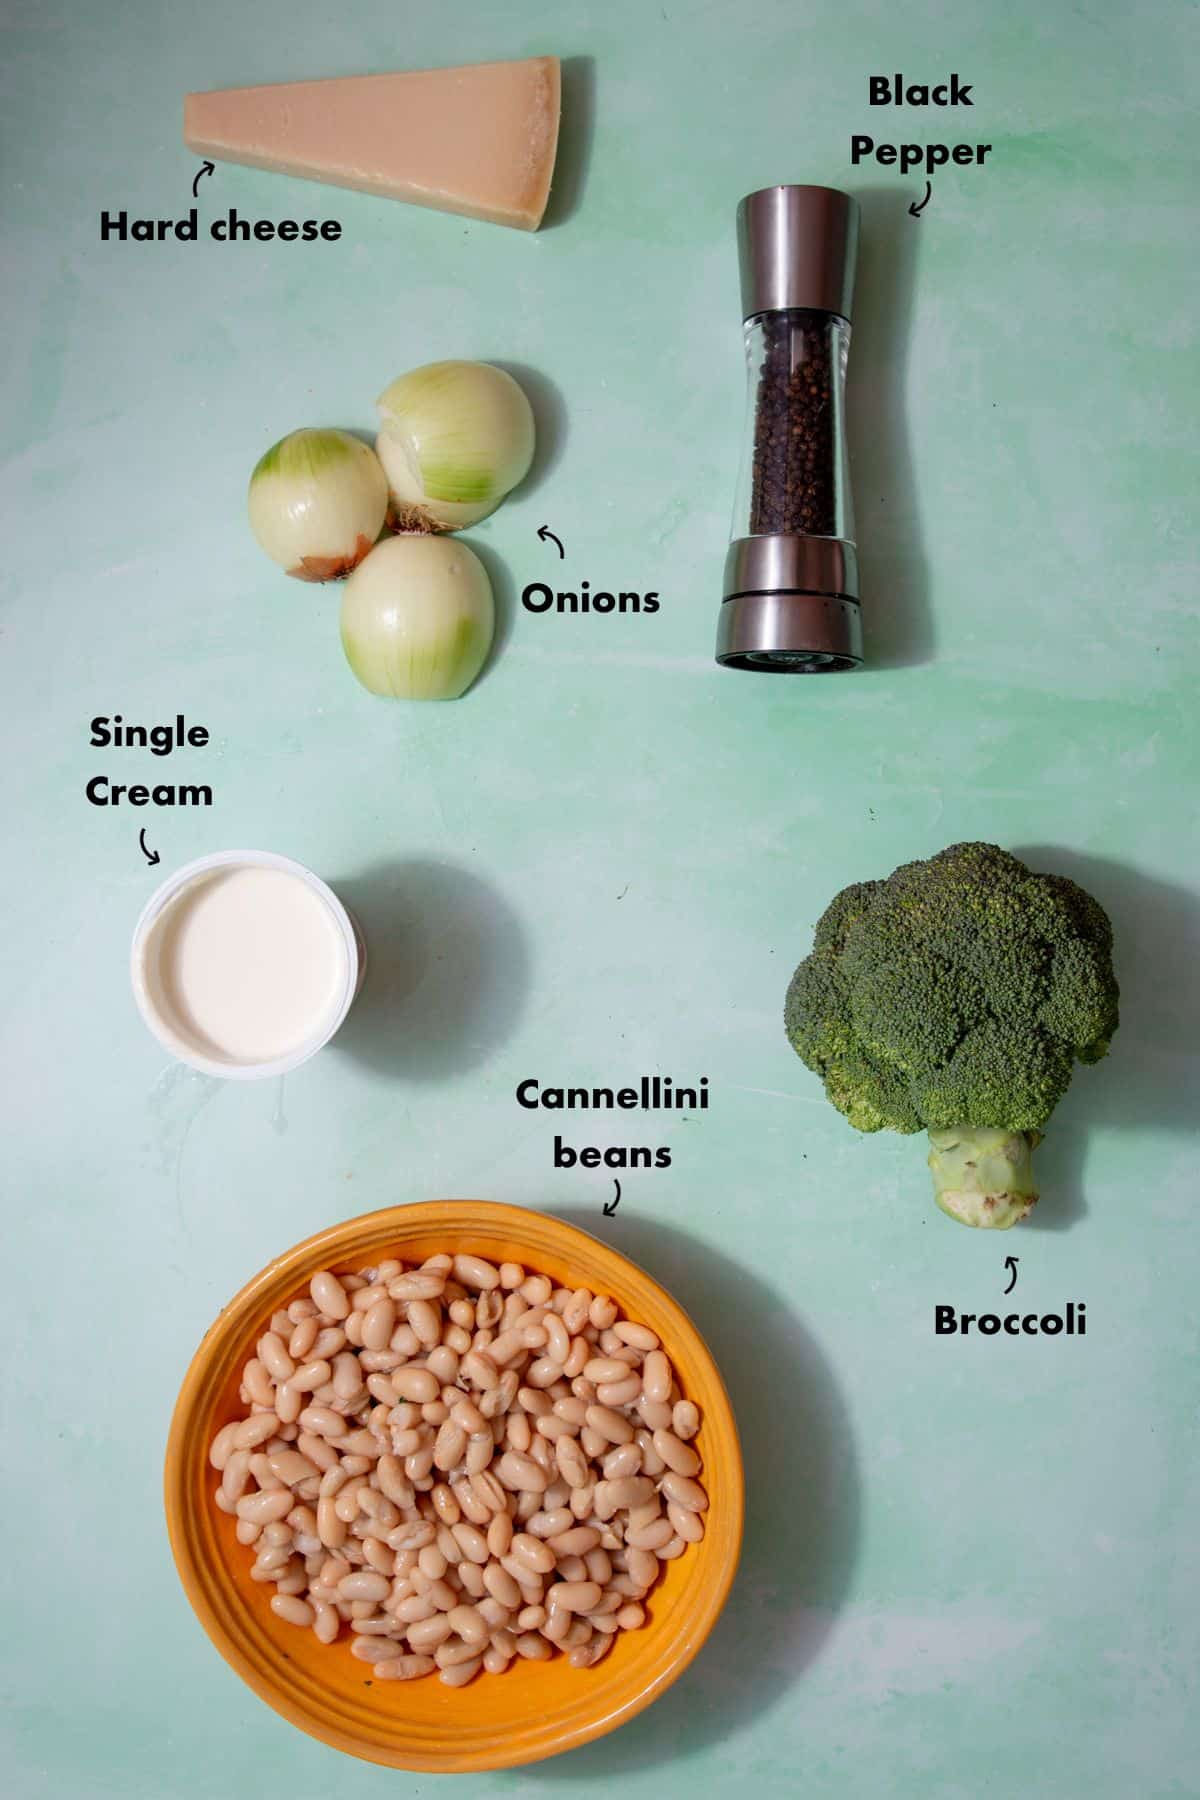 Ingredients to make the cannellini bean recipe laid out on a pale blue background and labelled.